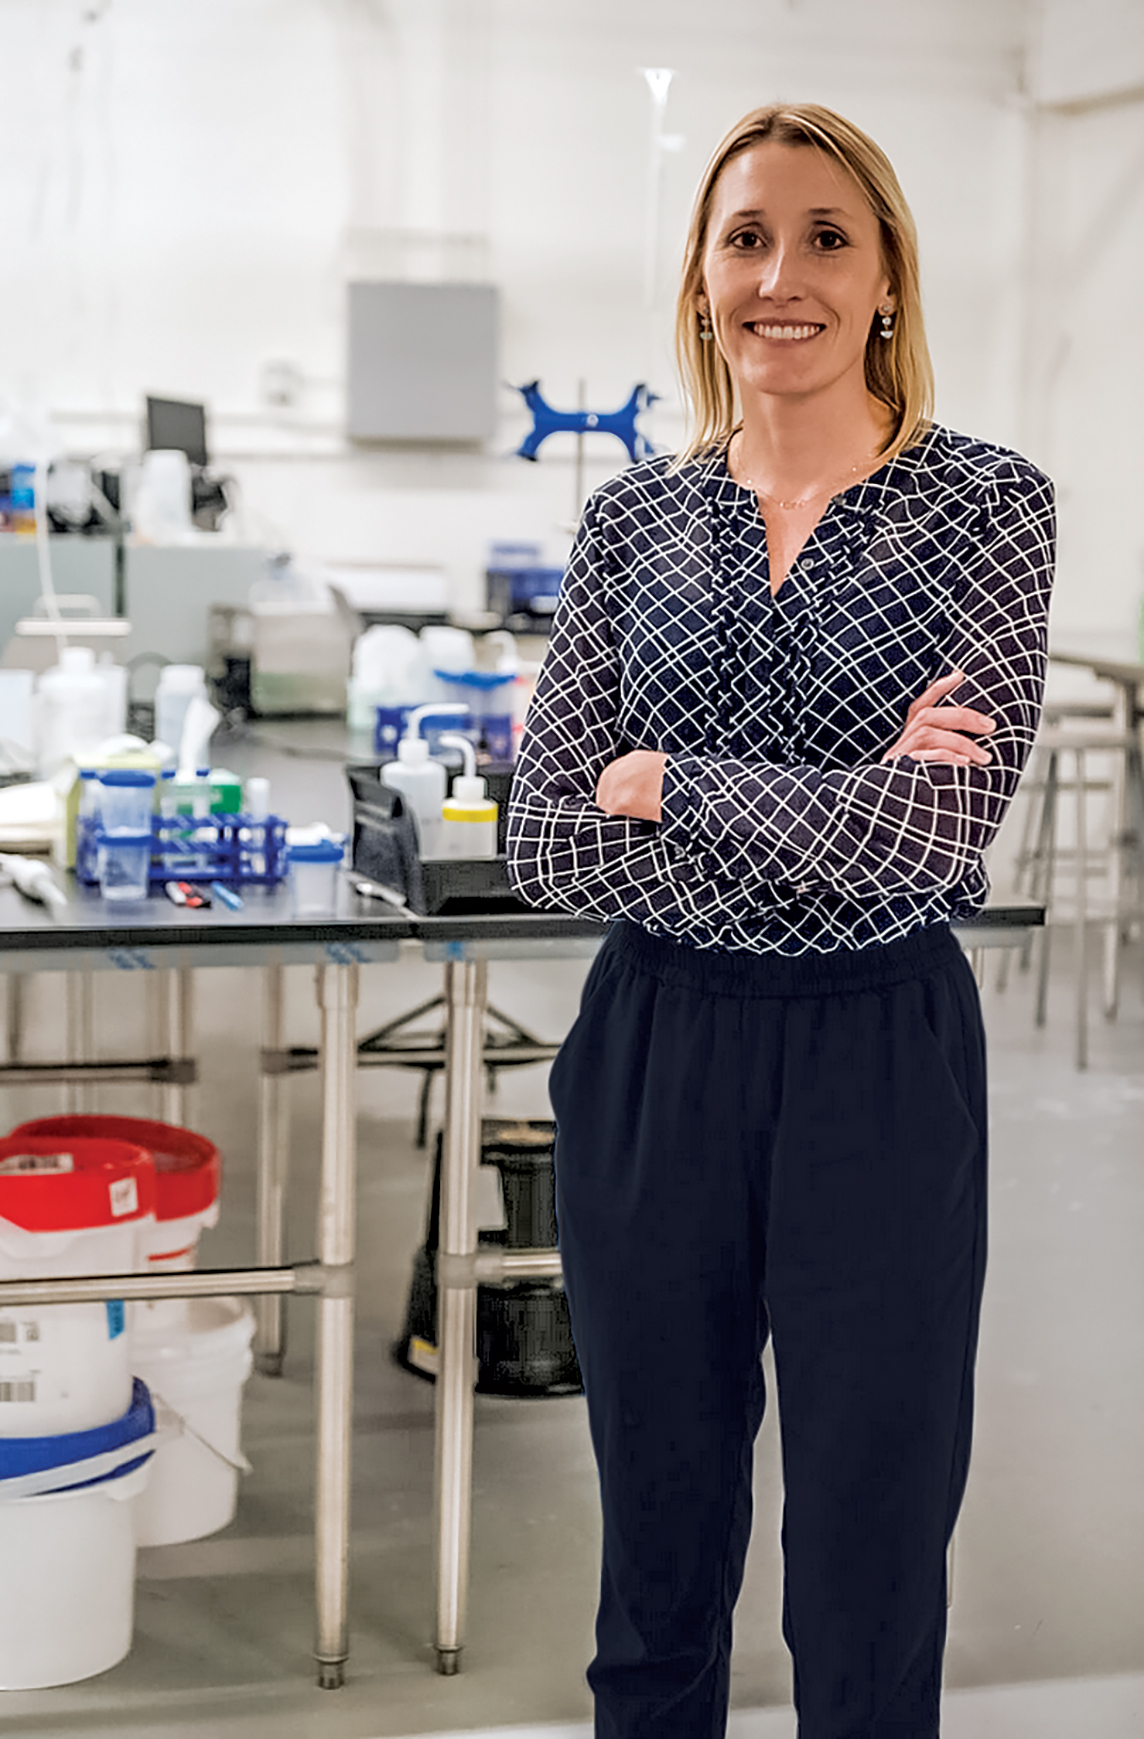 Travertine Technologies' founder and CEO, Laura Lammers, standing on a walkway outside the bench area of the firm's lab